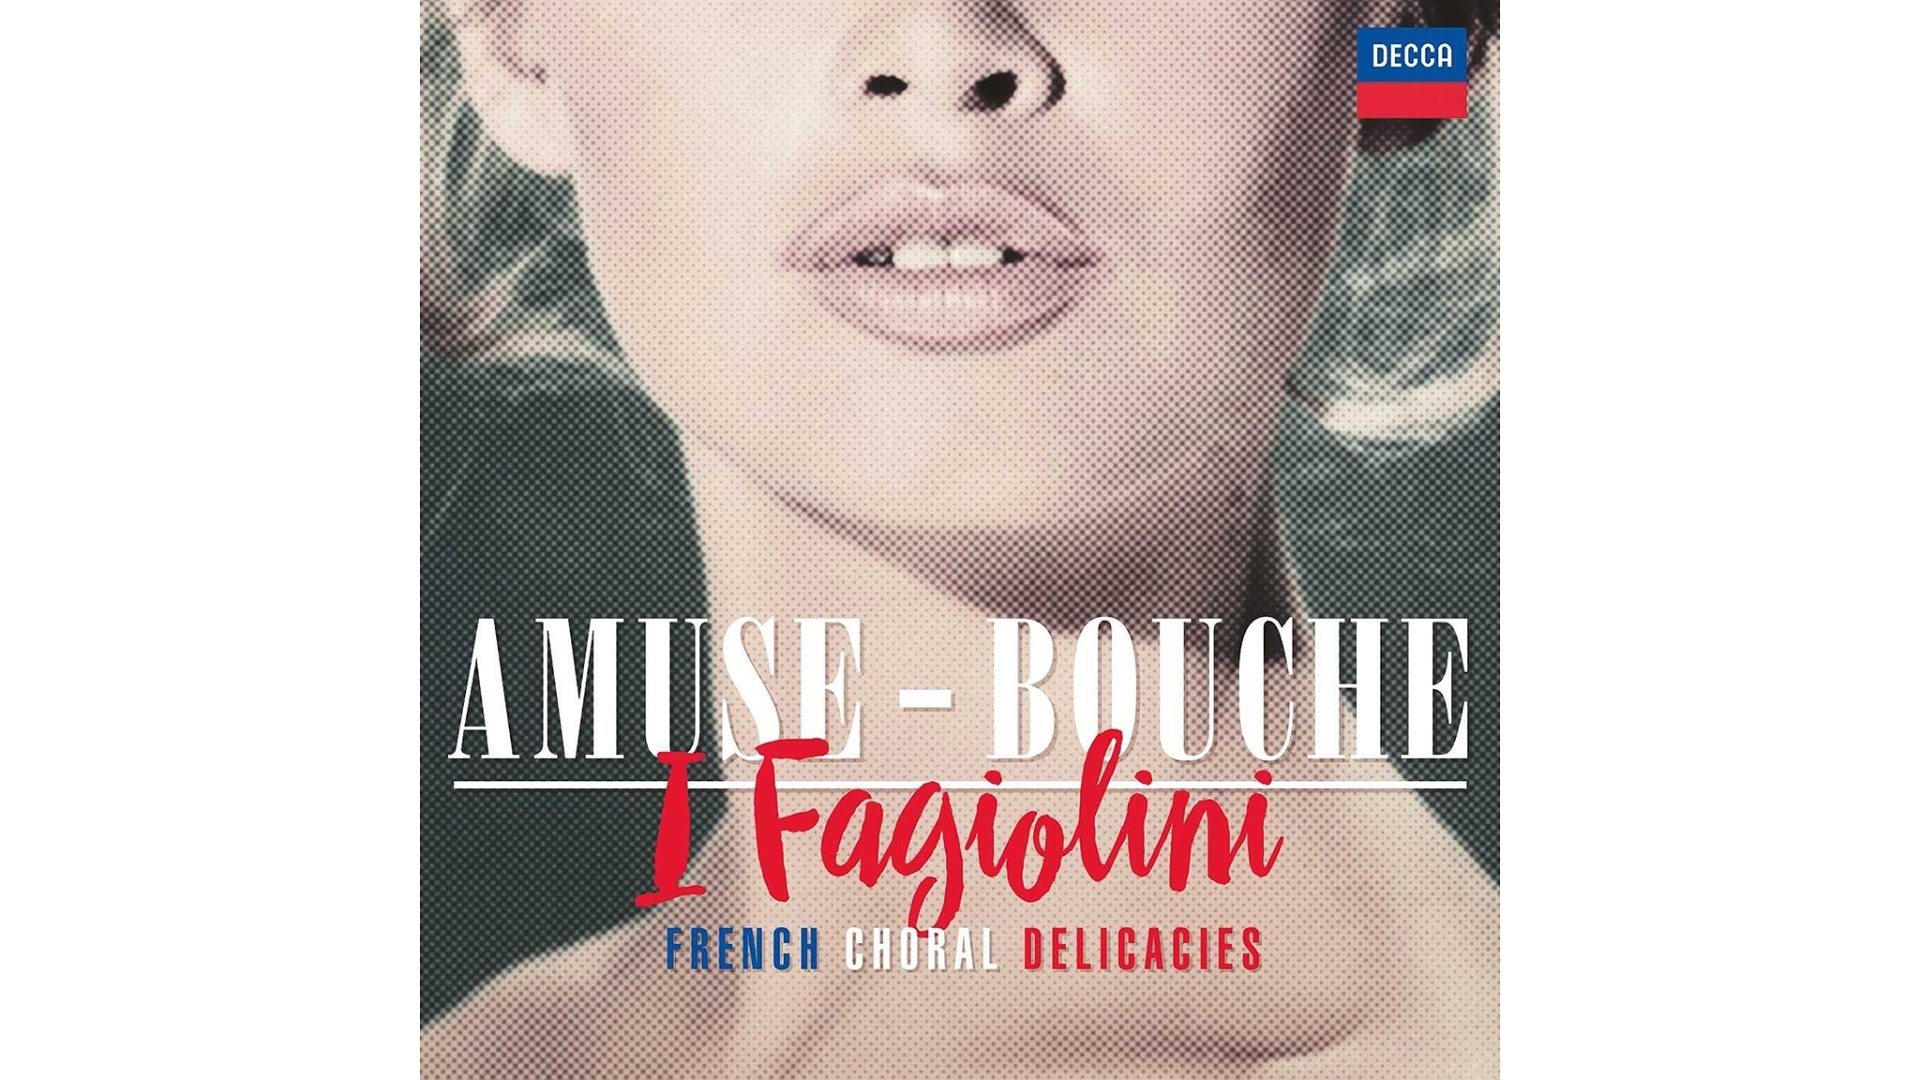 « Amuse-Bouche » : french choral delicacies